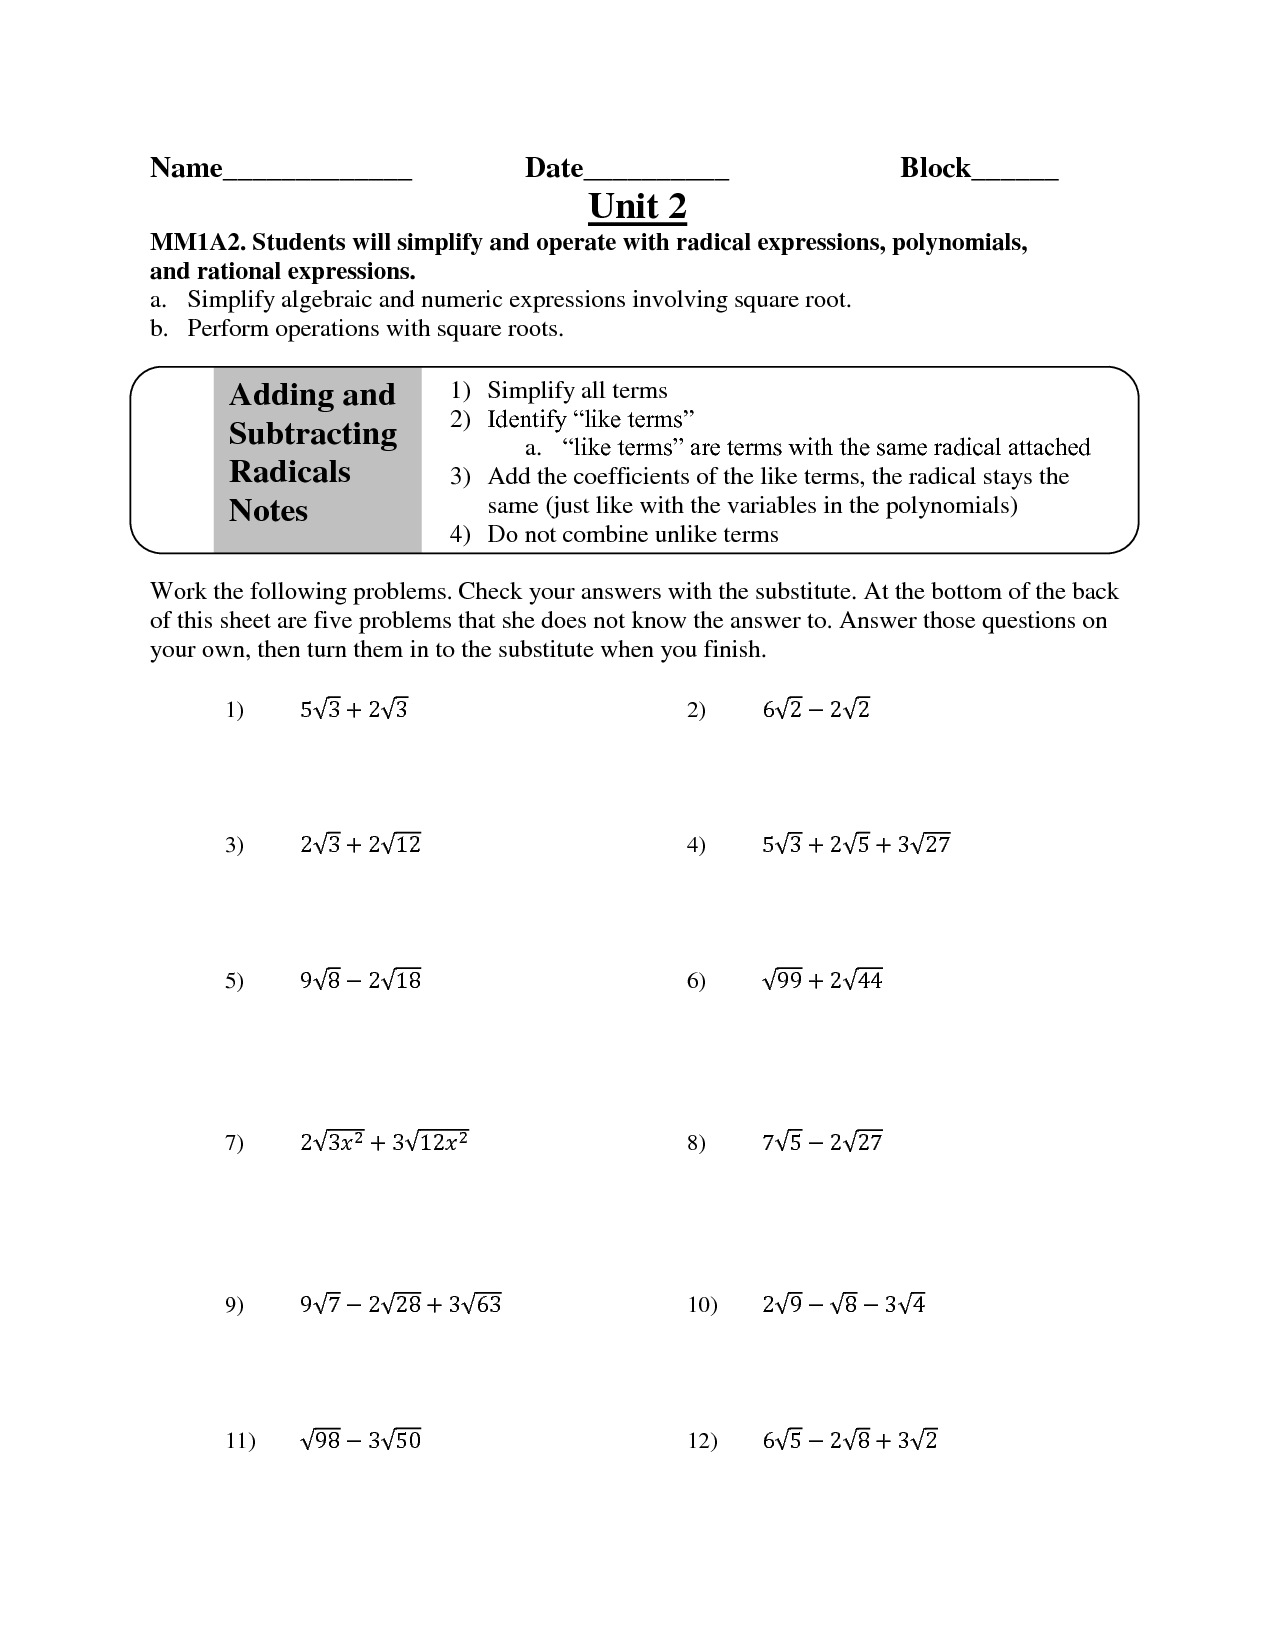 Adding and Subtracting Polynomials Worksheet Answers Image